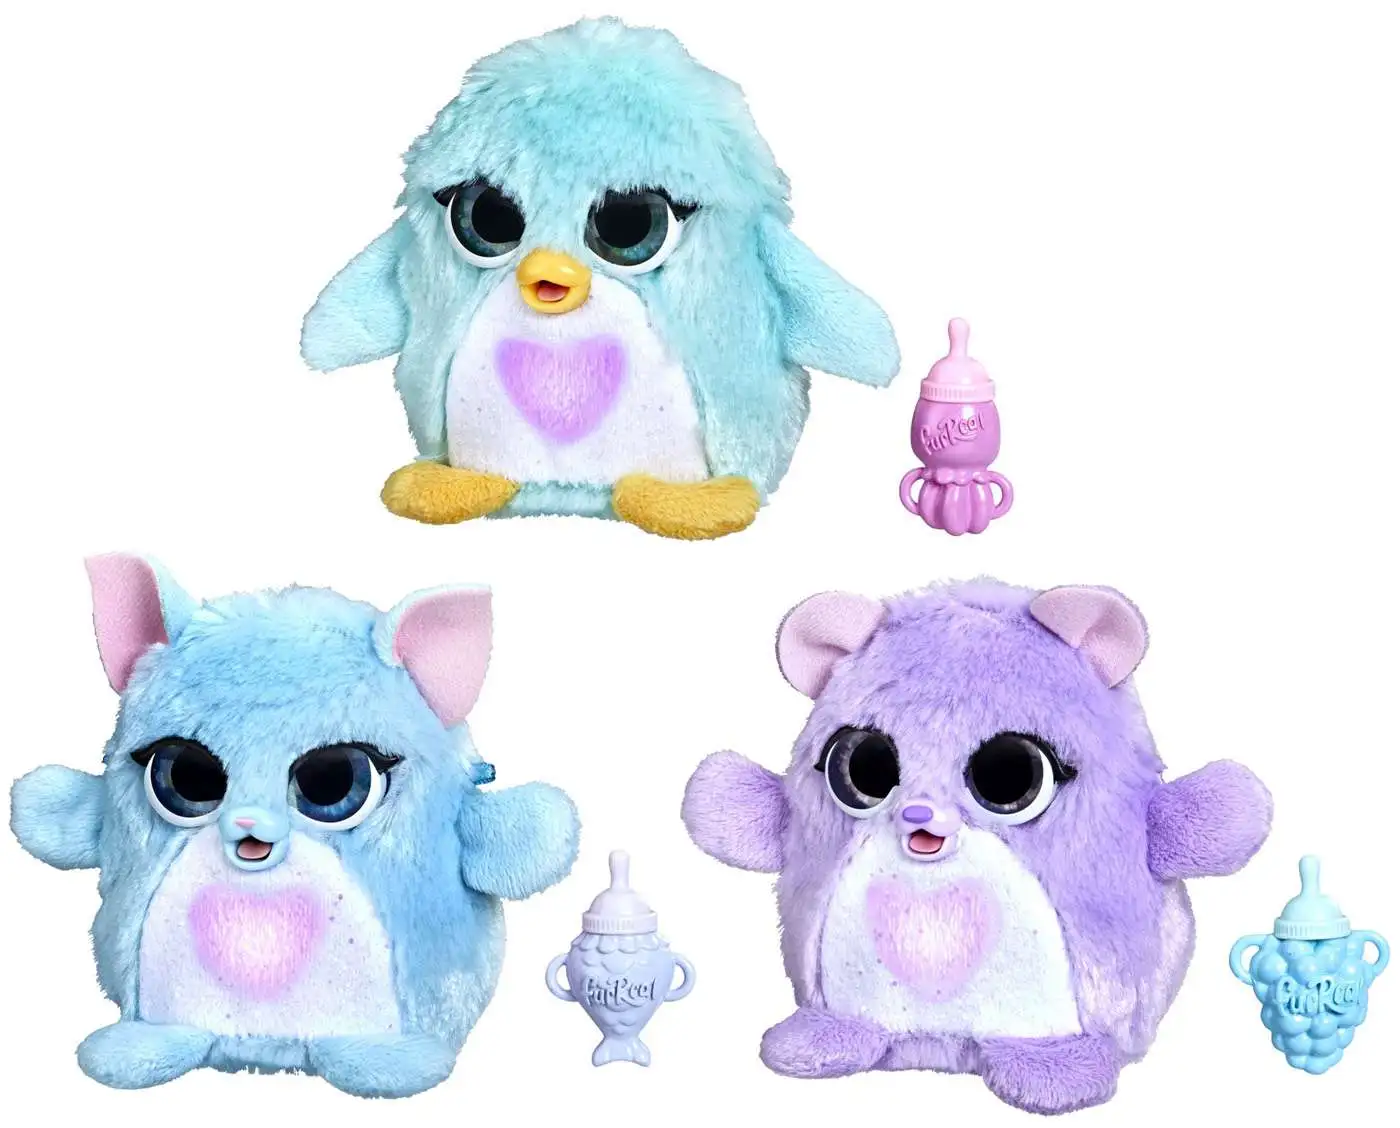 Furby, International Spy: How the Cute, Cuddly Creature Became a